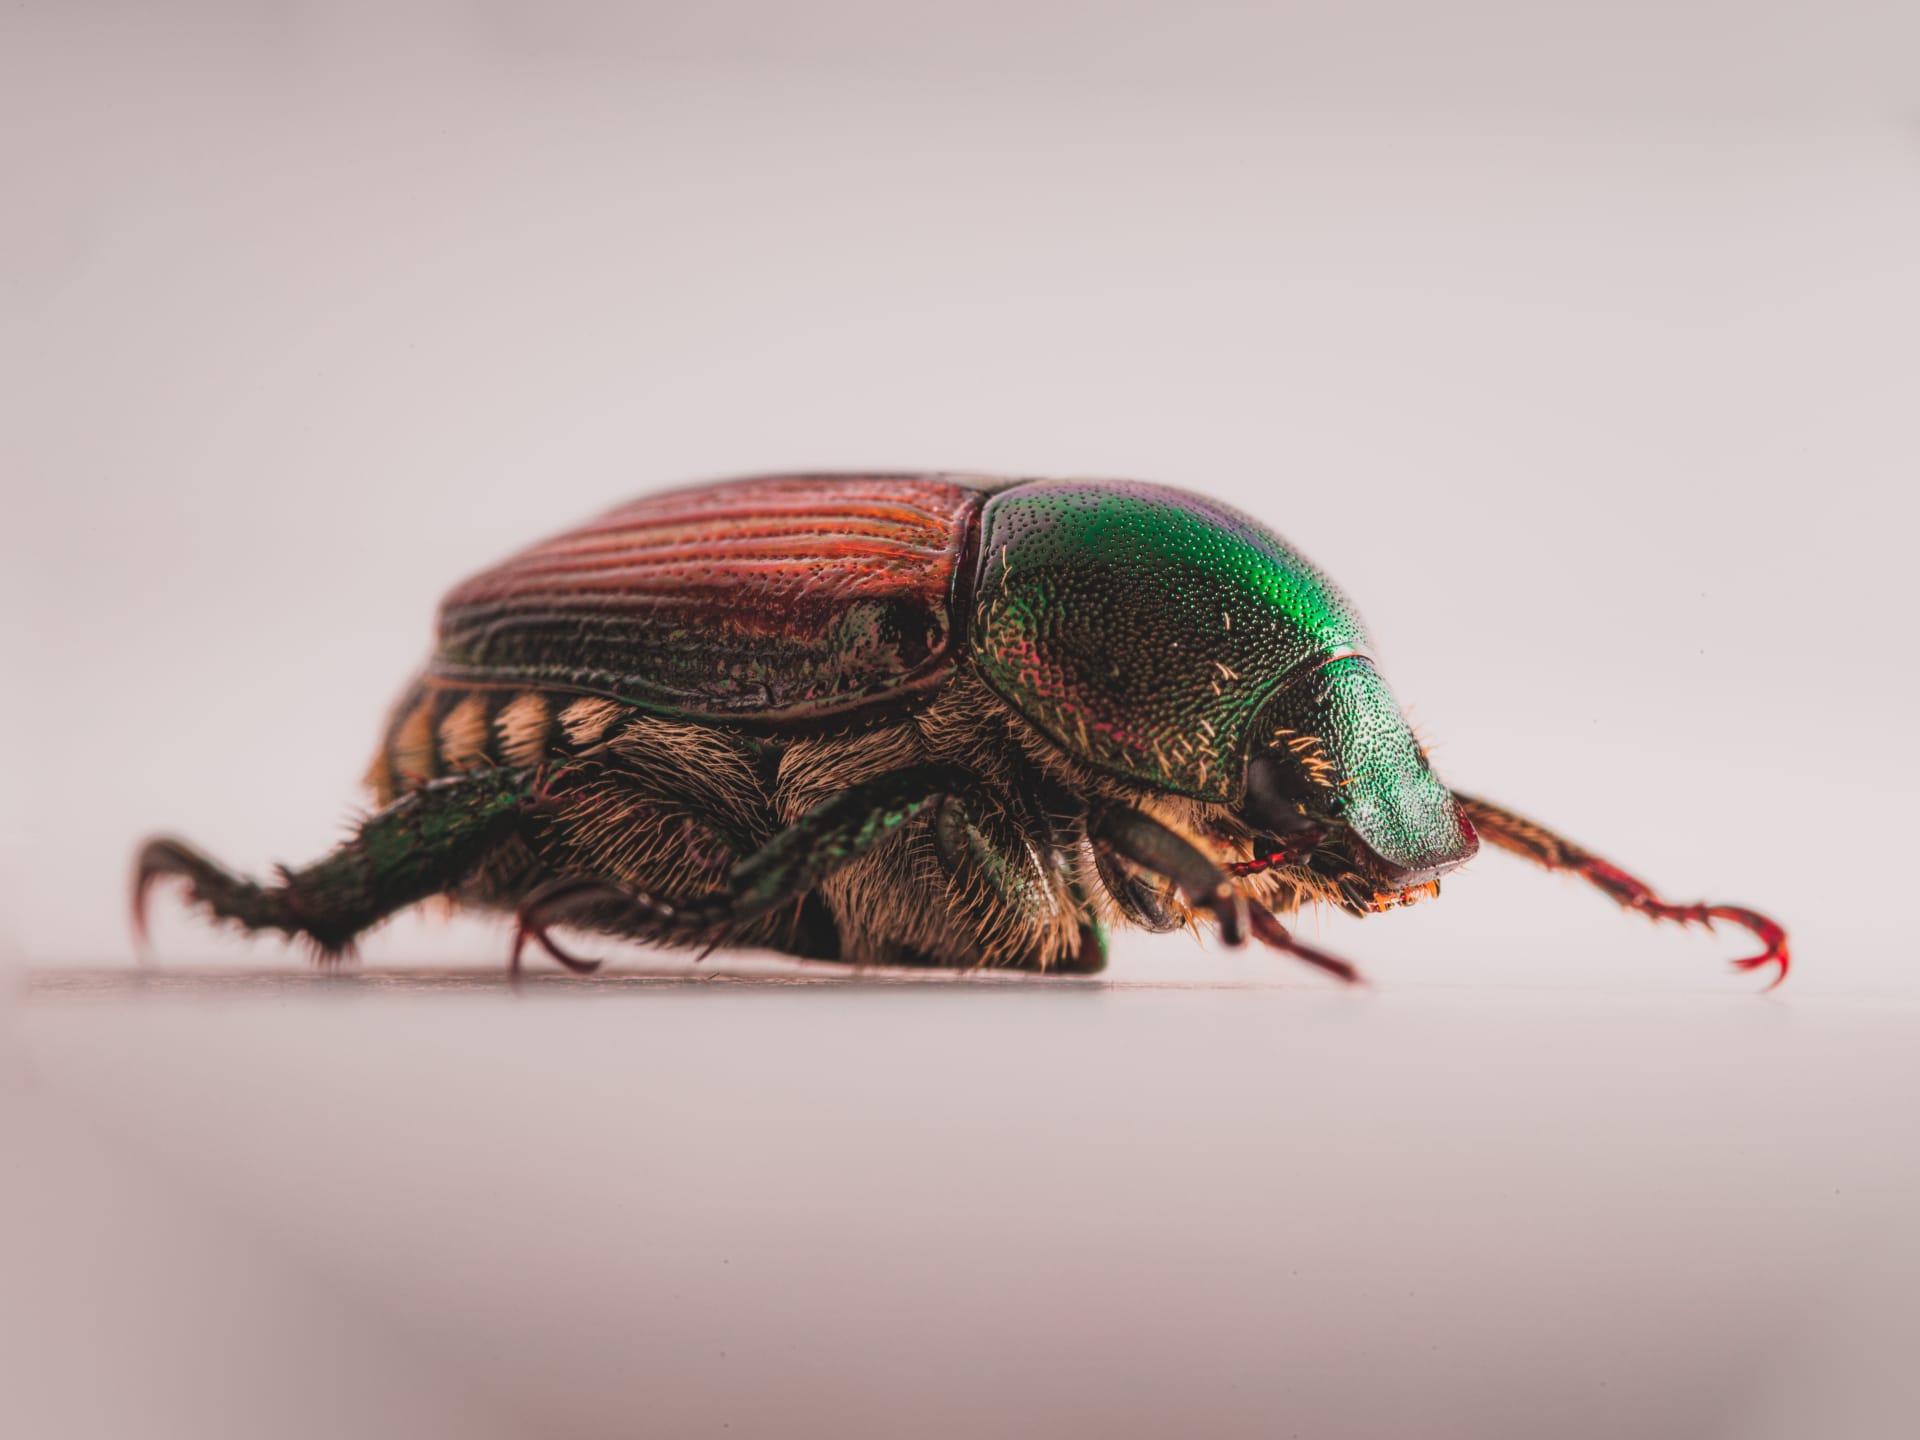 Japanese beetle pictures